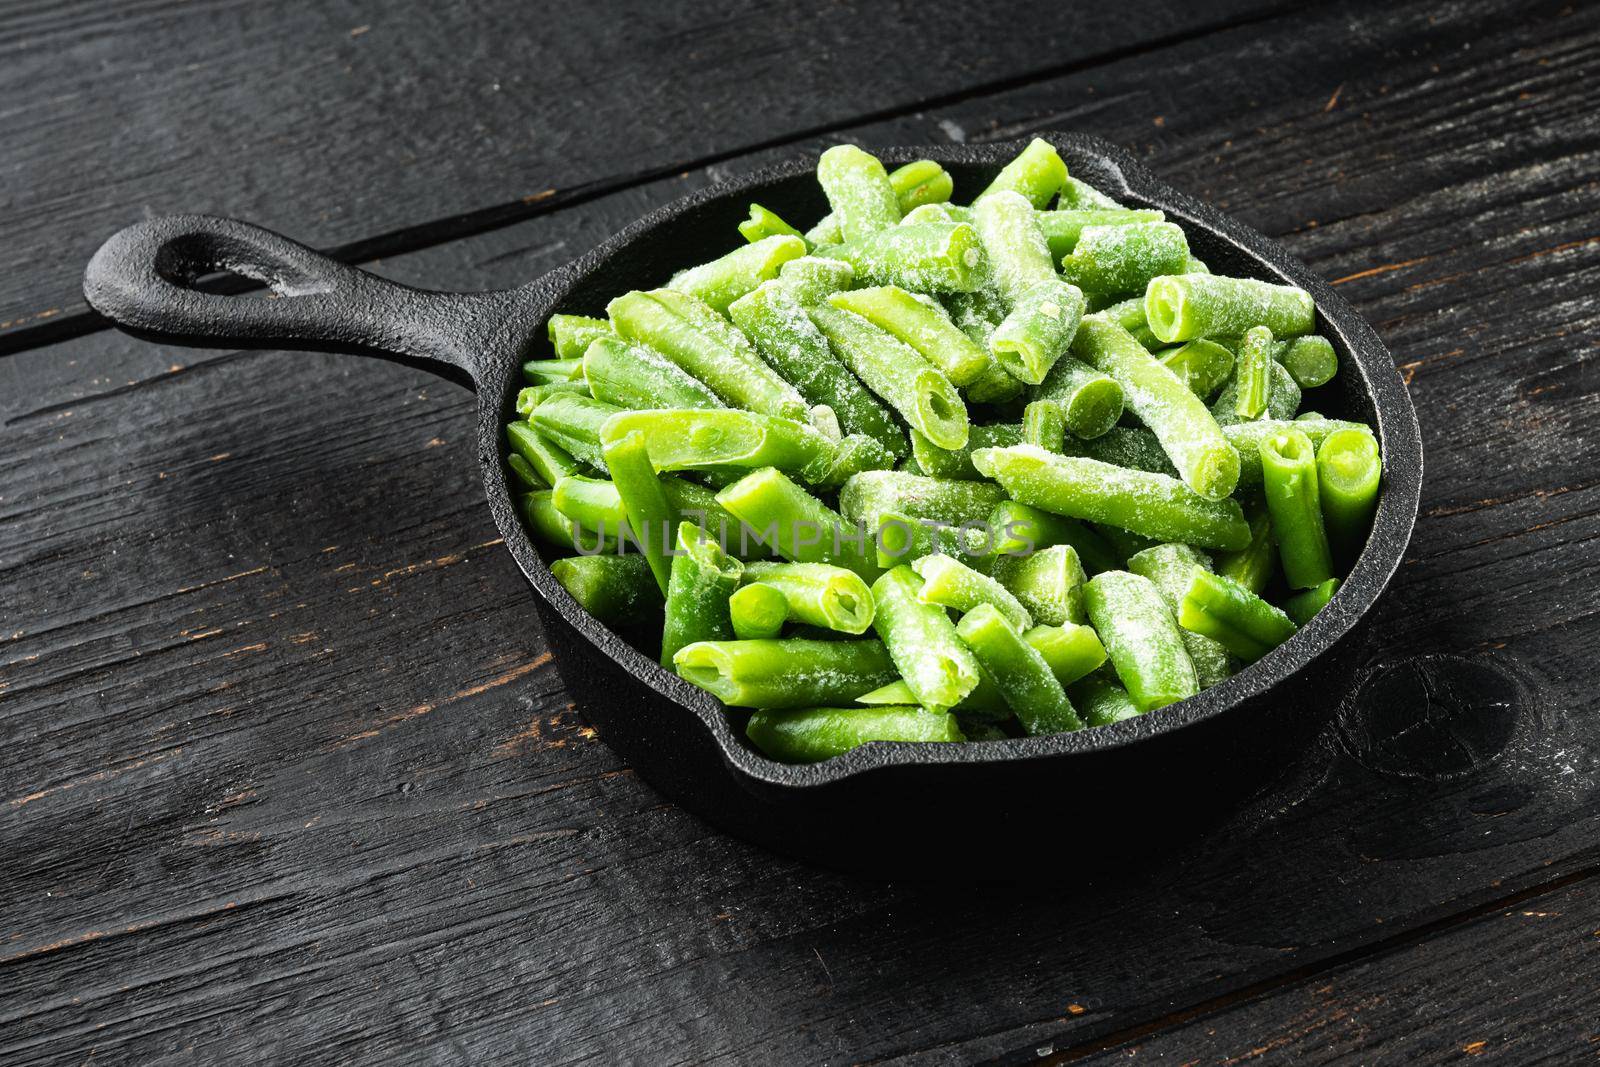 Frozen organic green beans. Healthy food concept, in frying cast iron pan, on black wooden table background by Ilianesolenyi